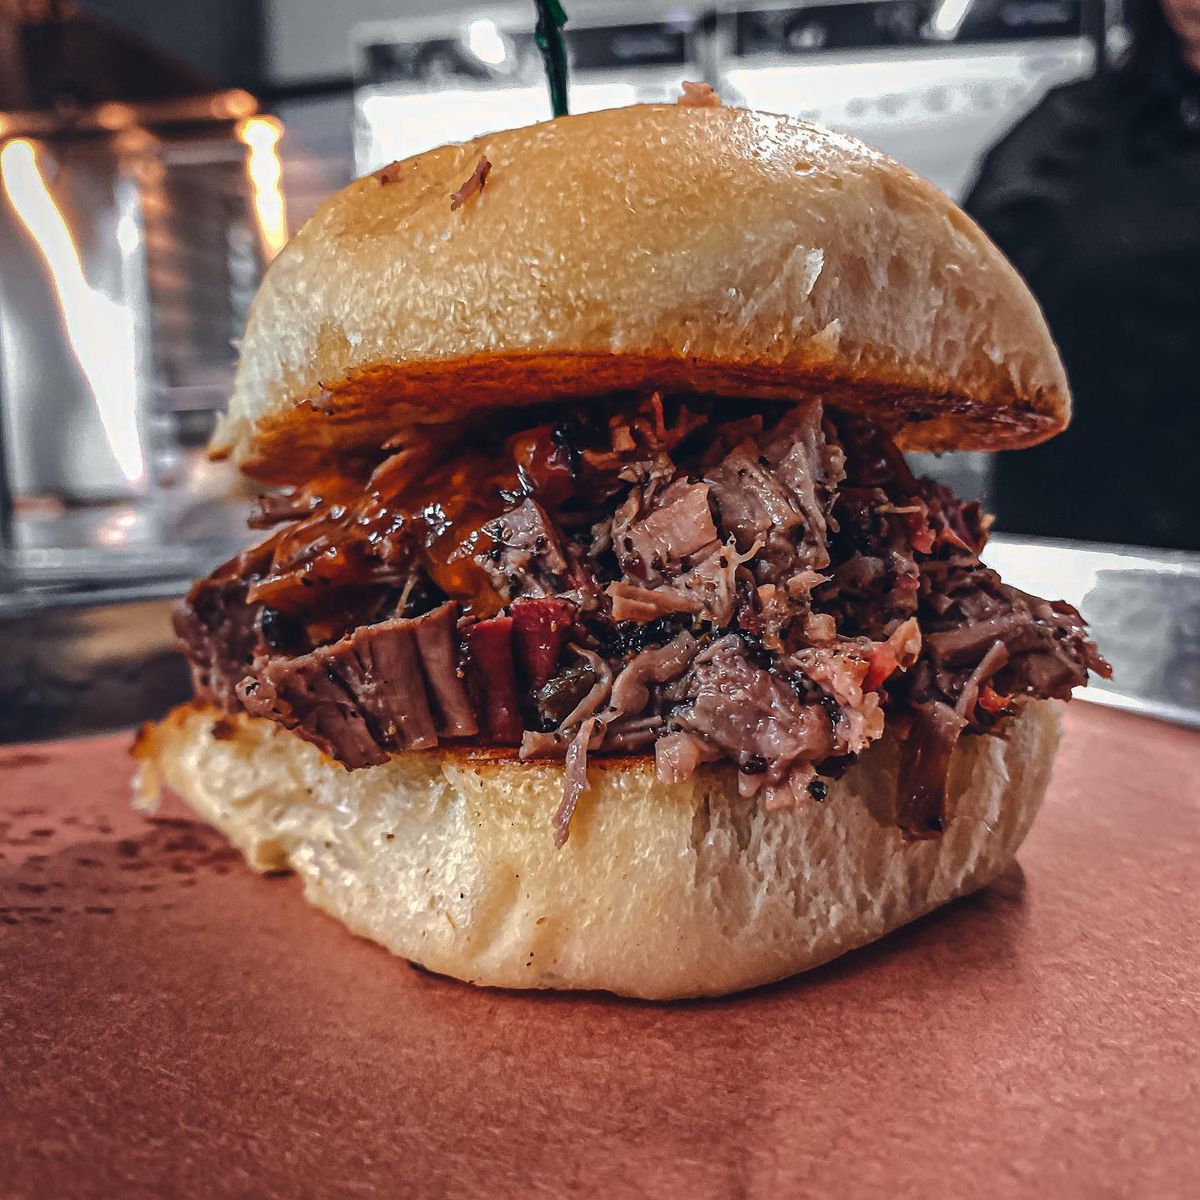 A sandwich with chopped beef brisket in between two bun halves on brown butcher paper.